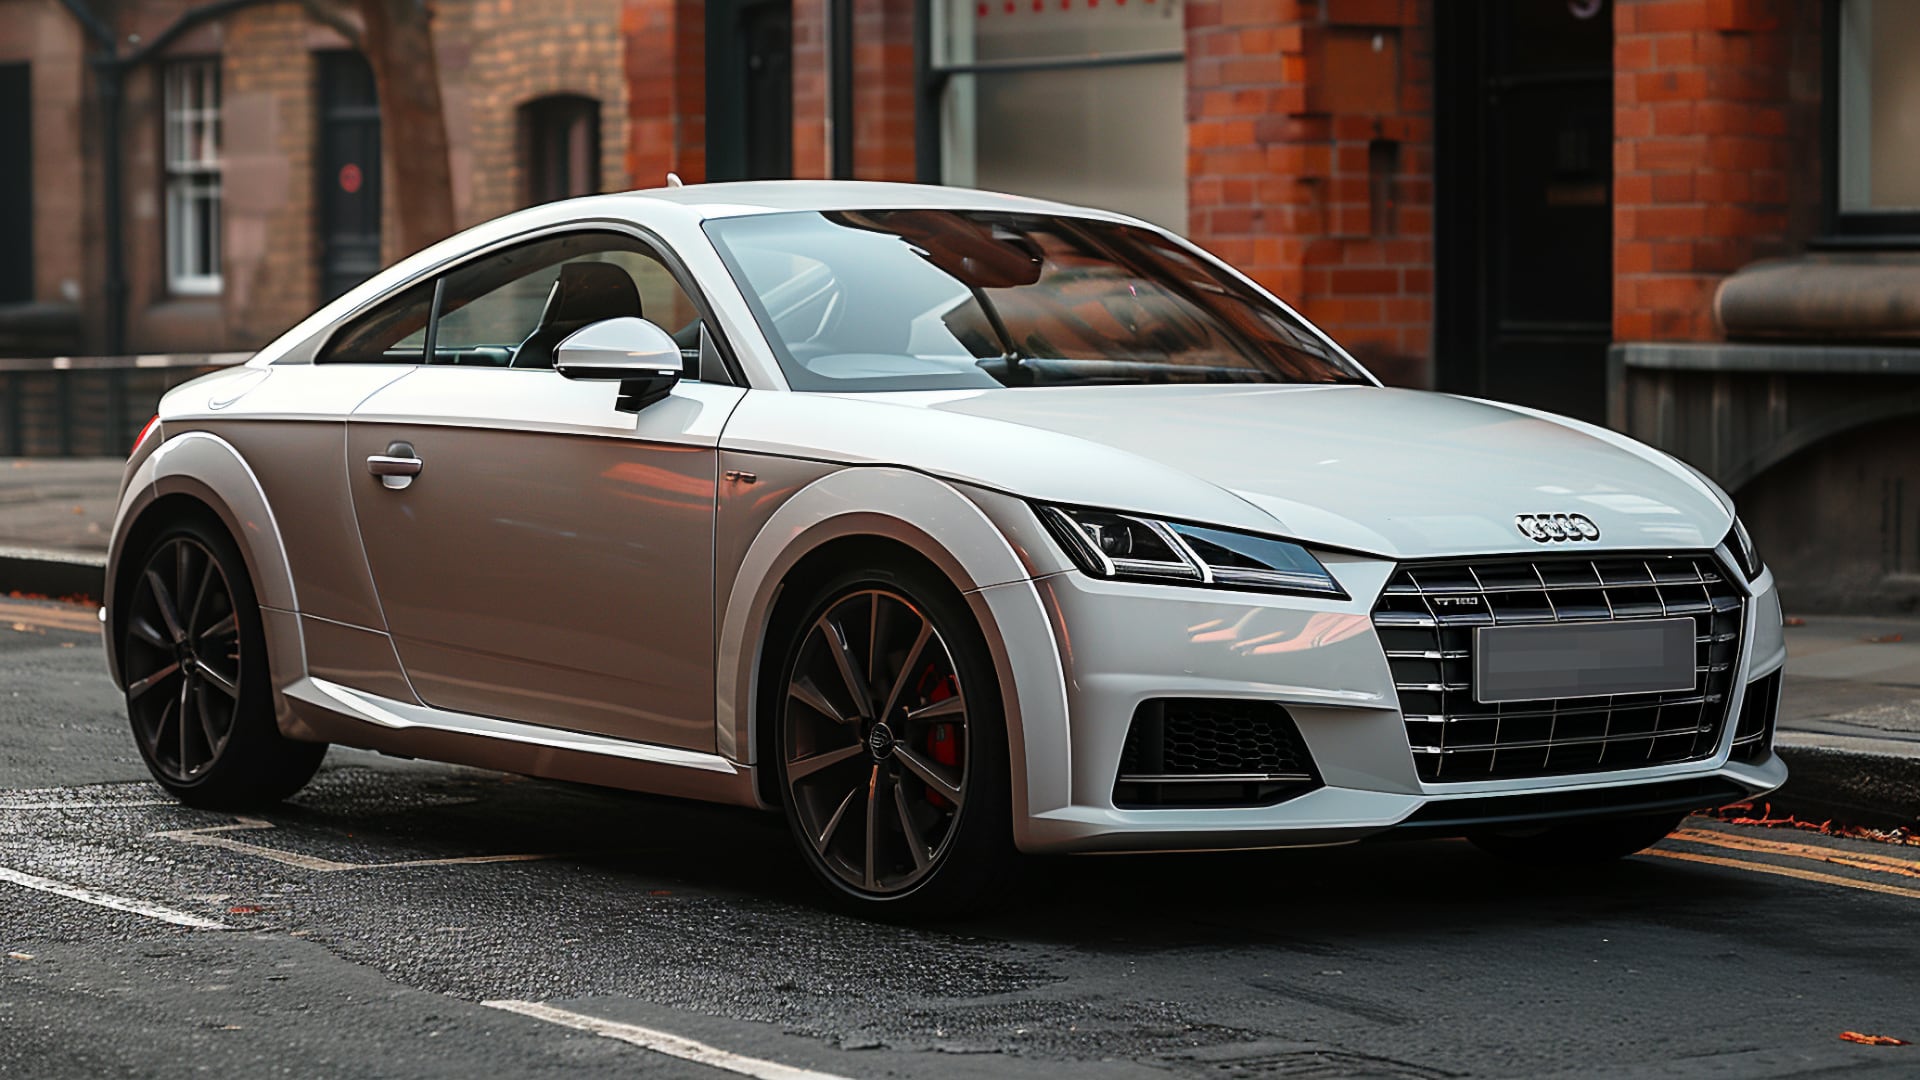 A white Audi TT, from one of the years to avoid, parked on the side of a street.